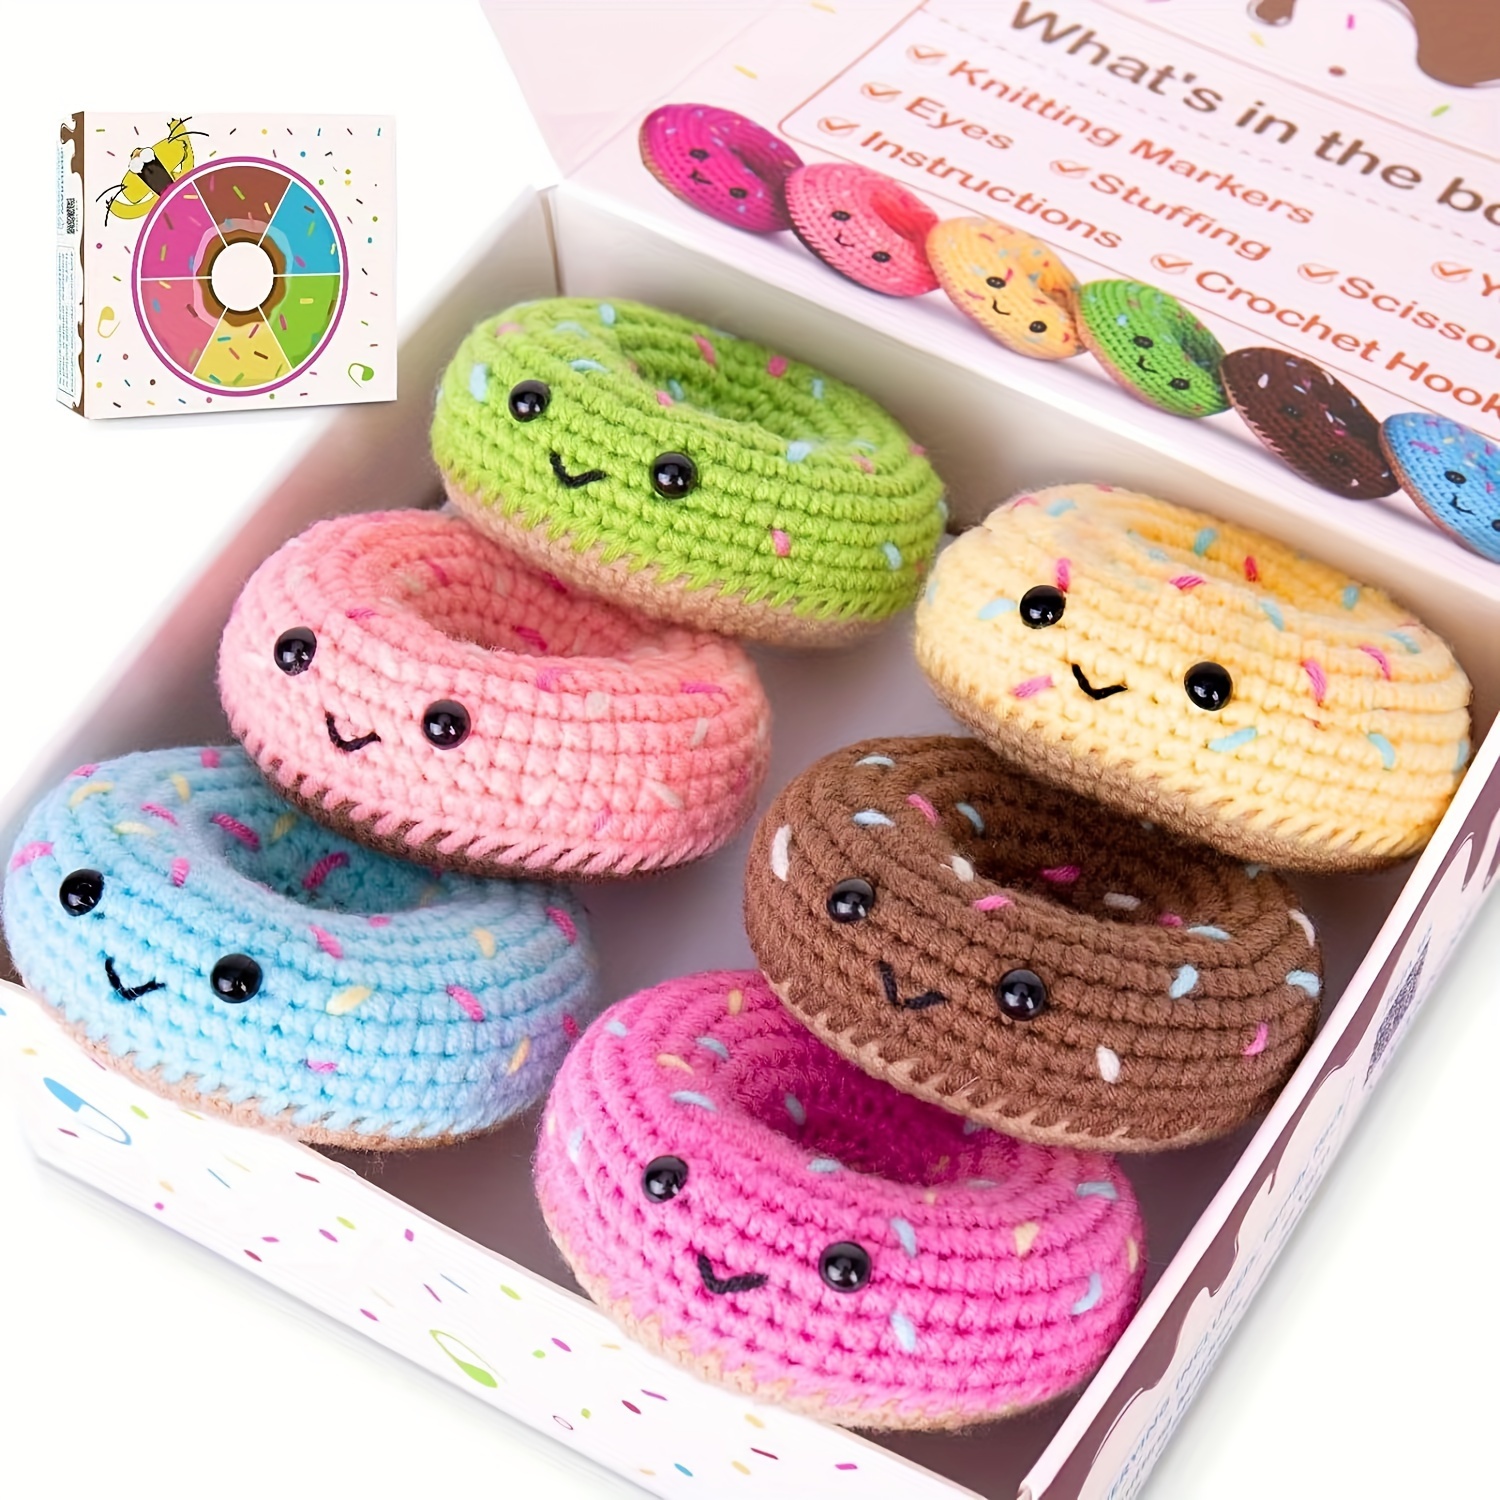 

Diy Crochet Donut Kit For Beginners - Pure Cotton Handcraft Material Set With Easy-to-follow Tutorials, Suitable For Ages 14+